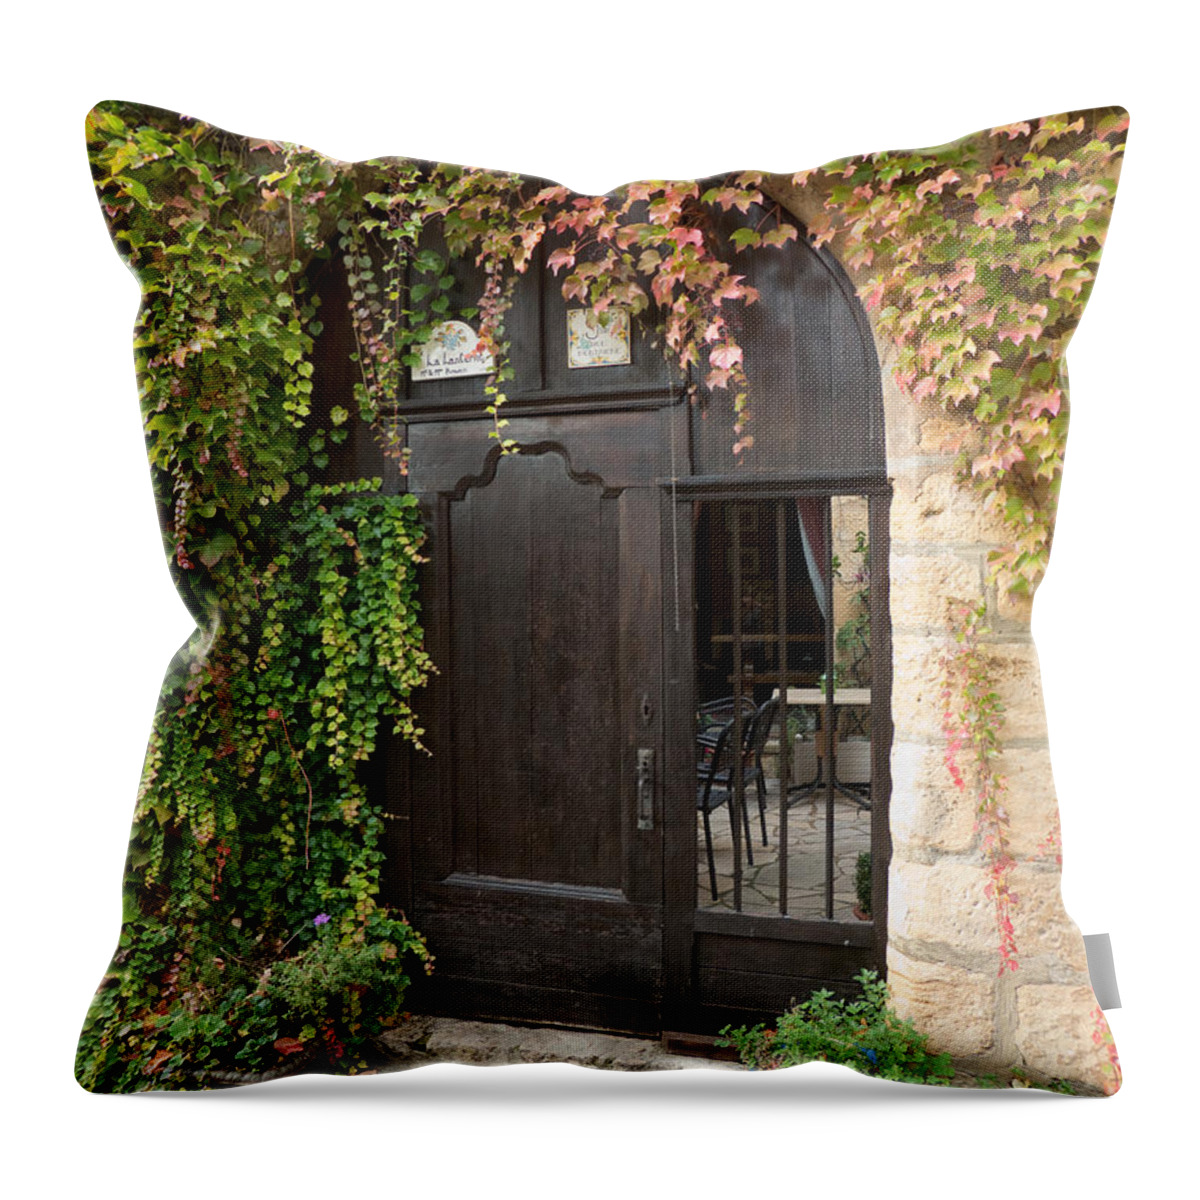 Door Throw Pillow featuring the photograph Ivy Covered Doorway by Paul Topp